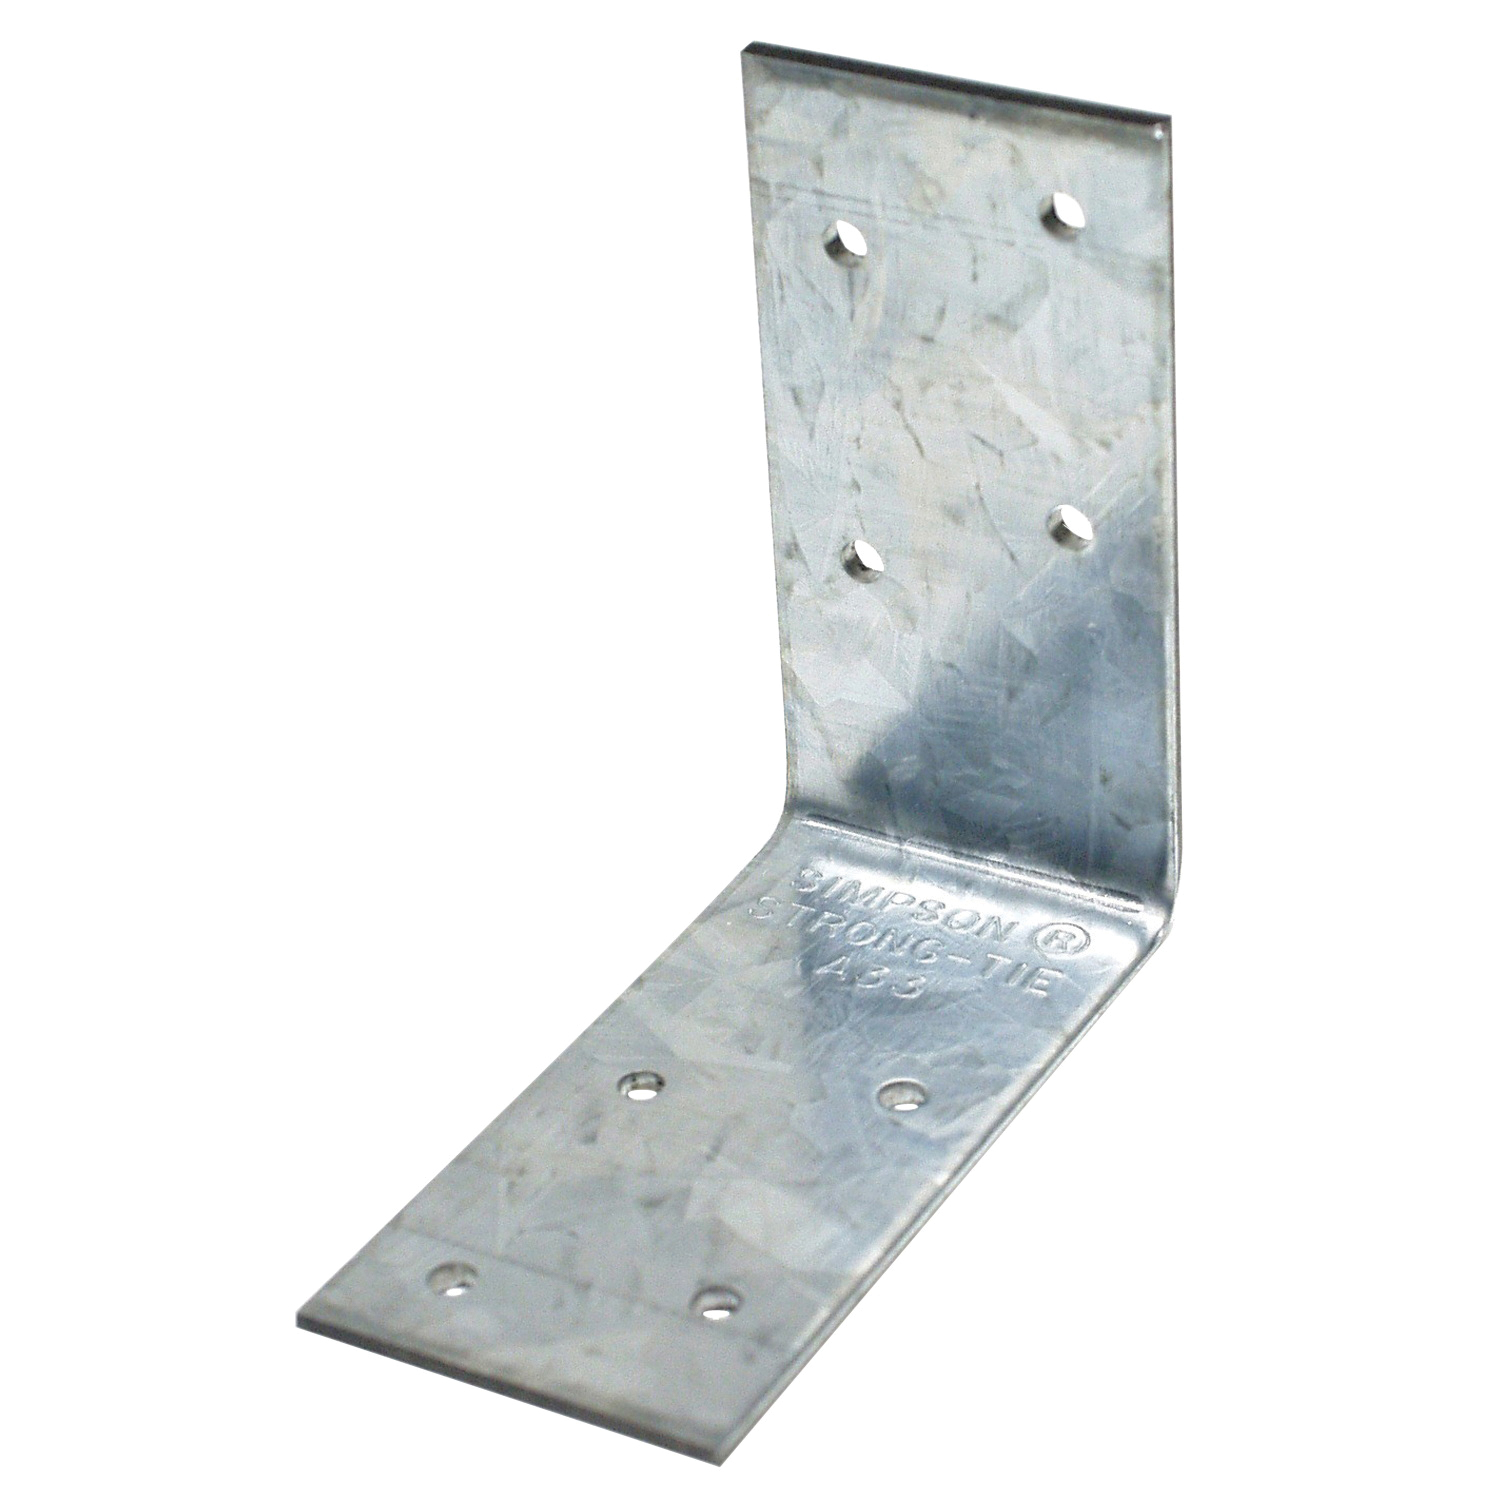 Simpson Strong-Tie A33 Angle, 3 in W, 3 in D, 1-1/2 in H, Steel, Galvanized/Zinc - 1